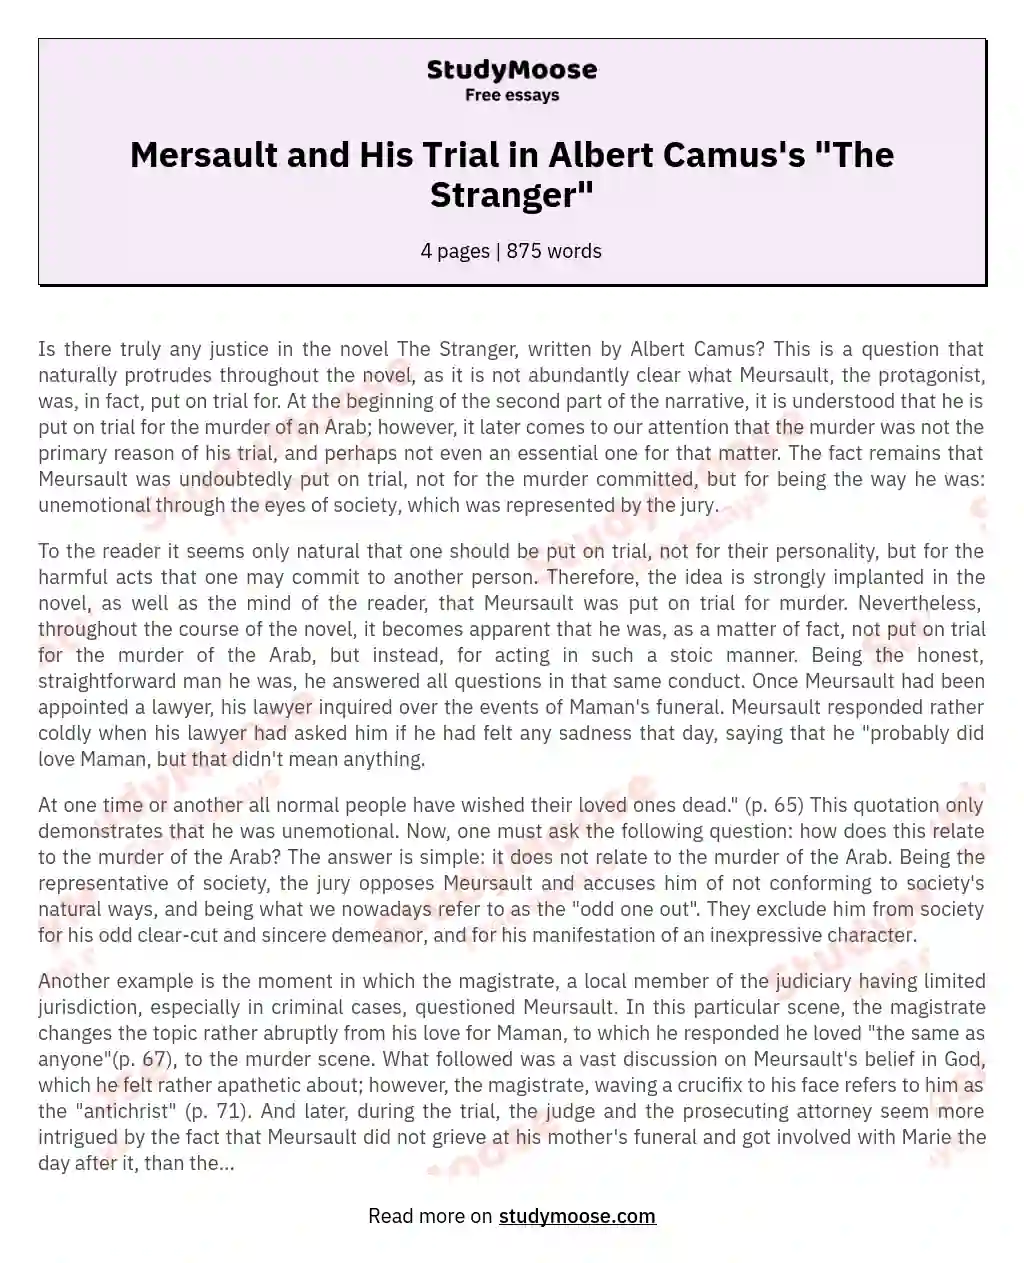 Mersault and His Trial in Albert Camus's "The Stranger" essay